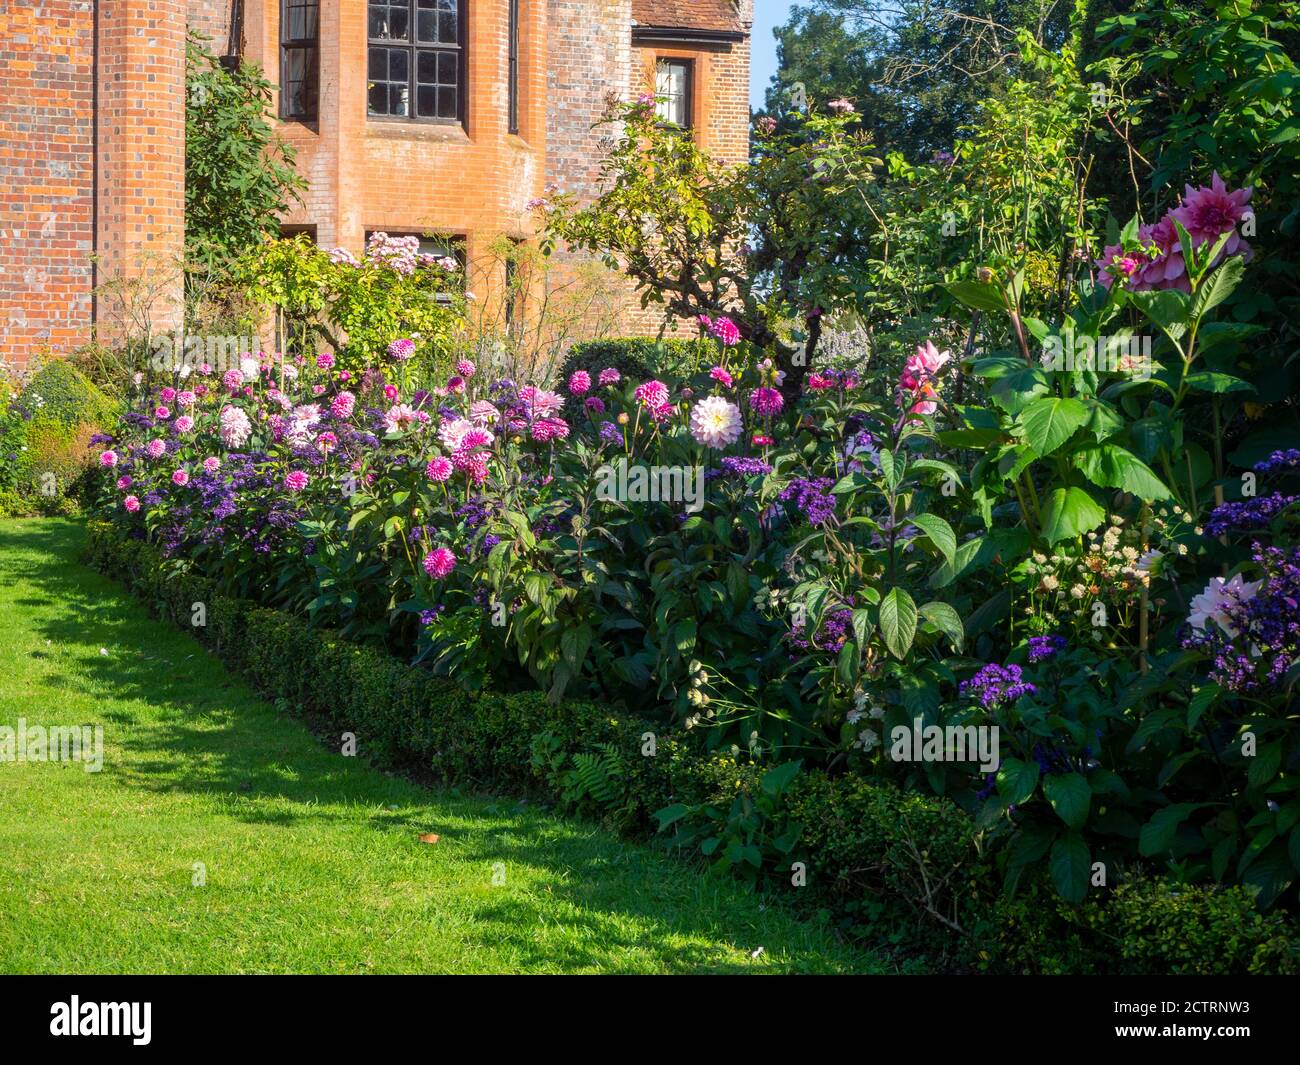 Chenies Manor House and Garden on a sunny September afternoon, 2020. Colourful dahlias, herbaceous plant borders, lawn. Stock Photo